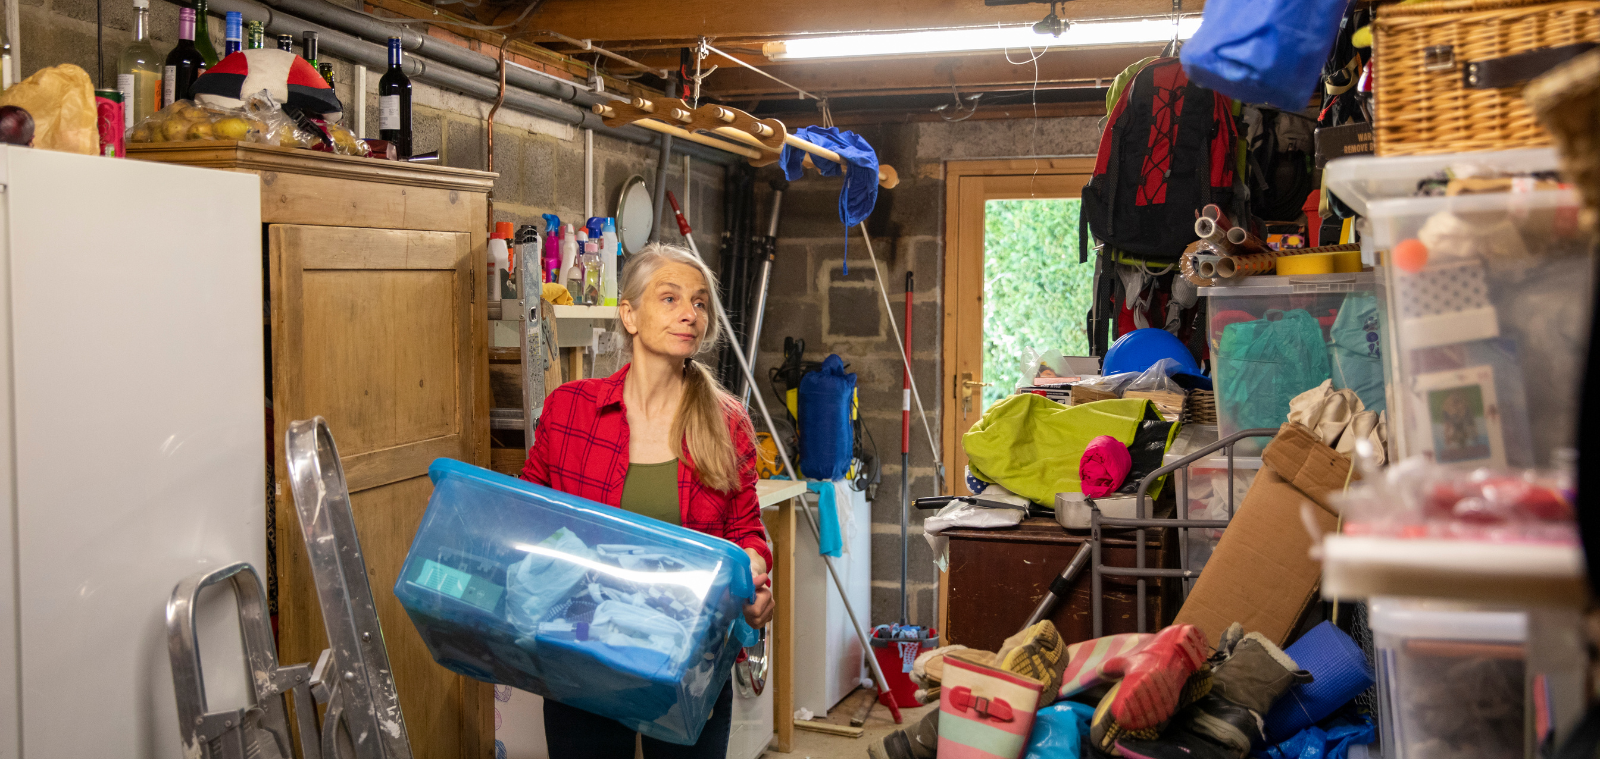 Declutter your space this year, a cluttered garage space.